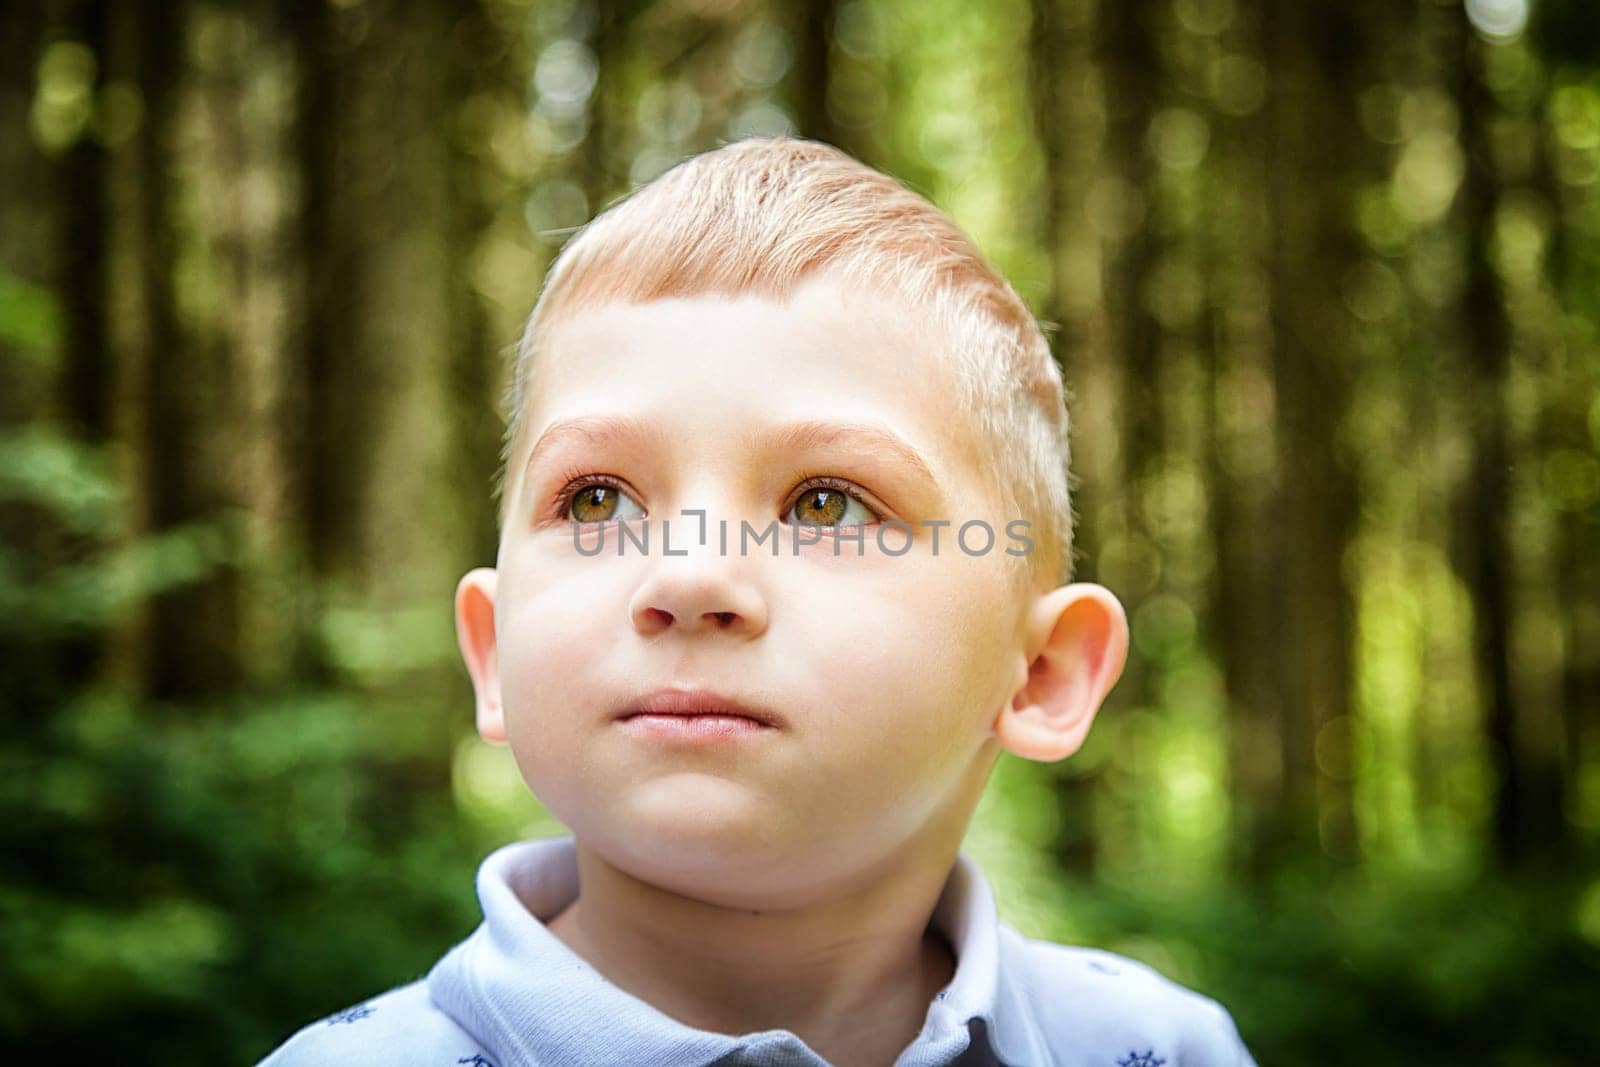 Young Boy in Sunlit Forest. Cute child bathed in dappled sunlight among trees. Walk, rest and nature